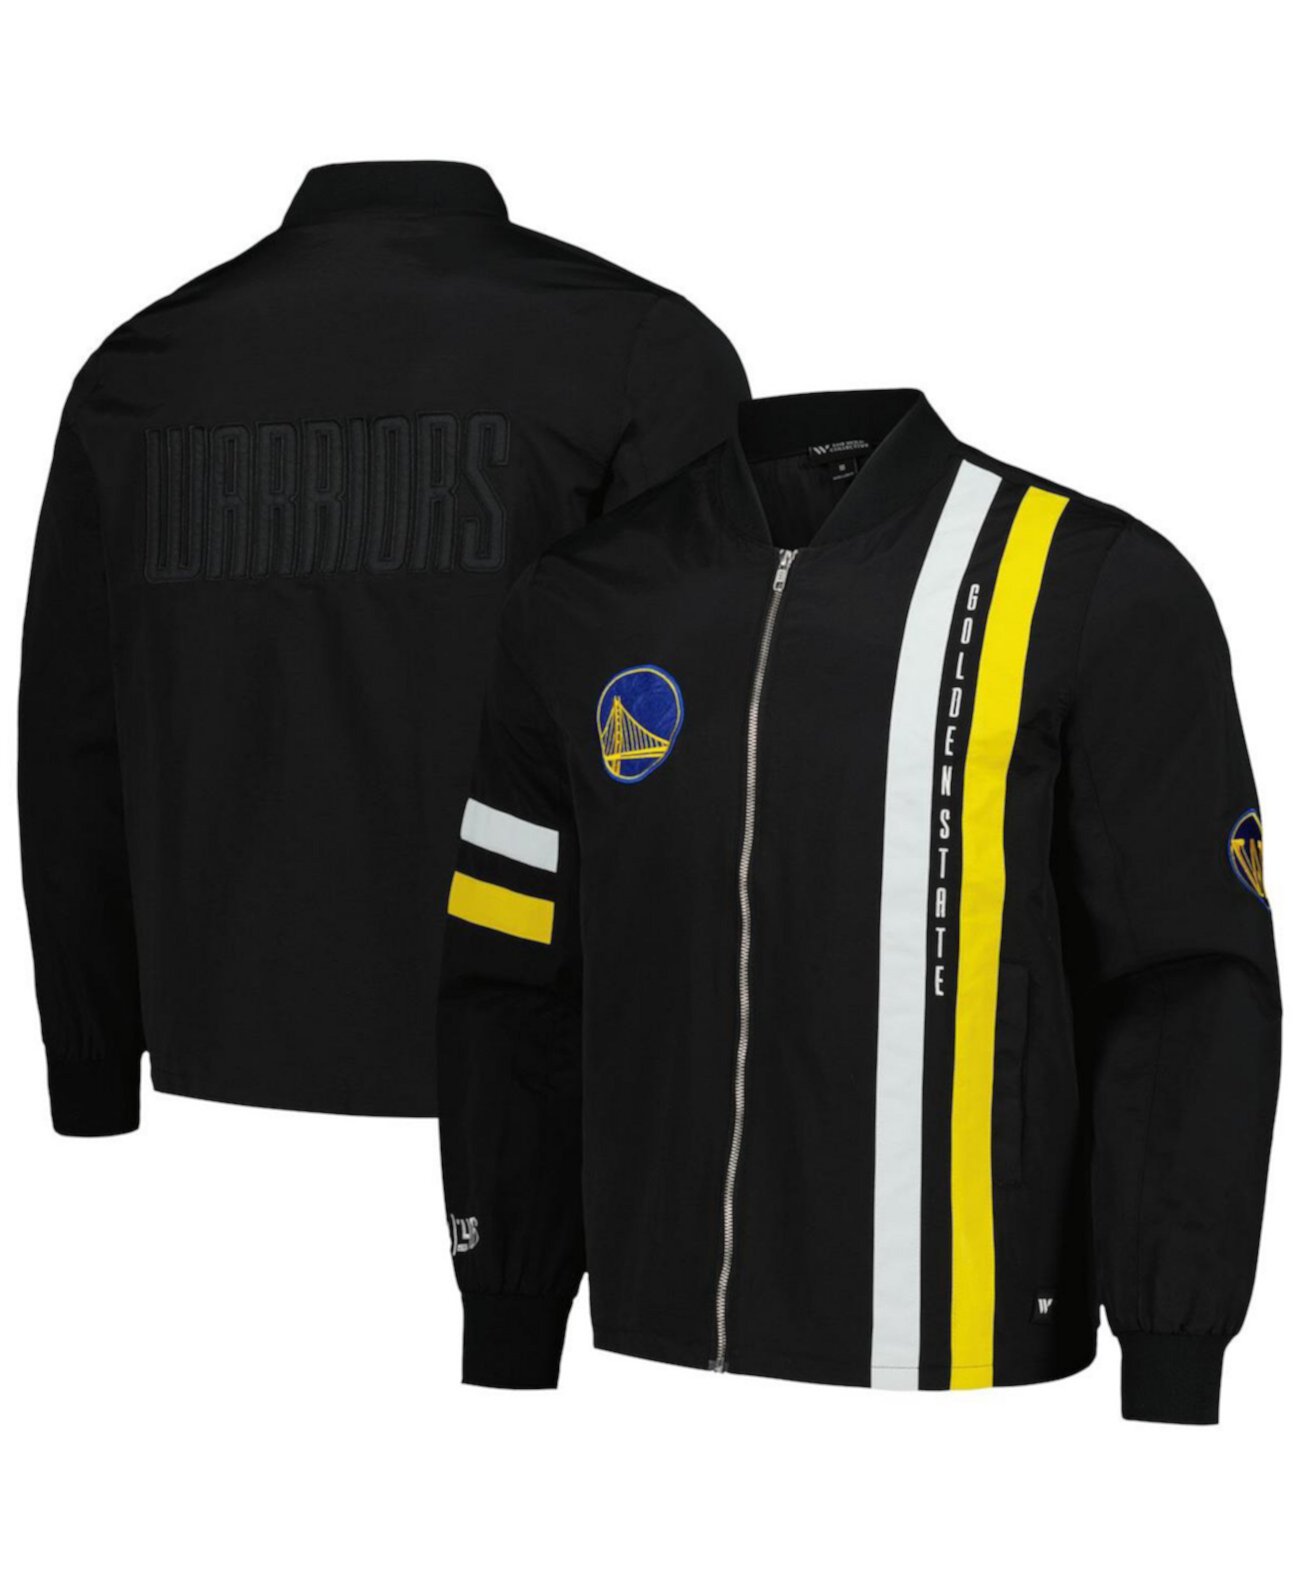 Men's and Women's Black Golden State Warriors Stitch Applique Full-Zip Bomber Jacket The Wild Collective